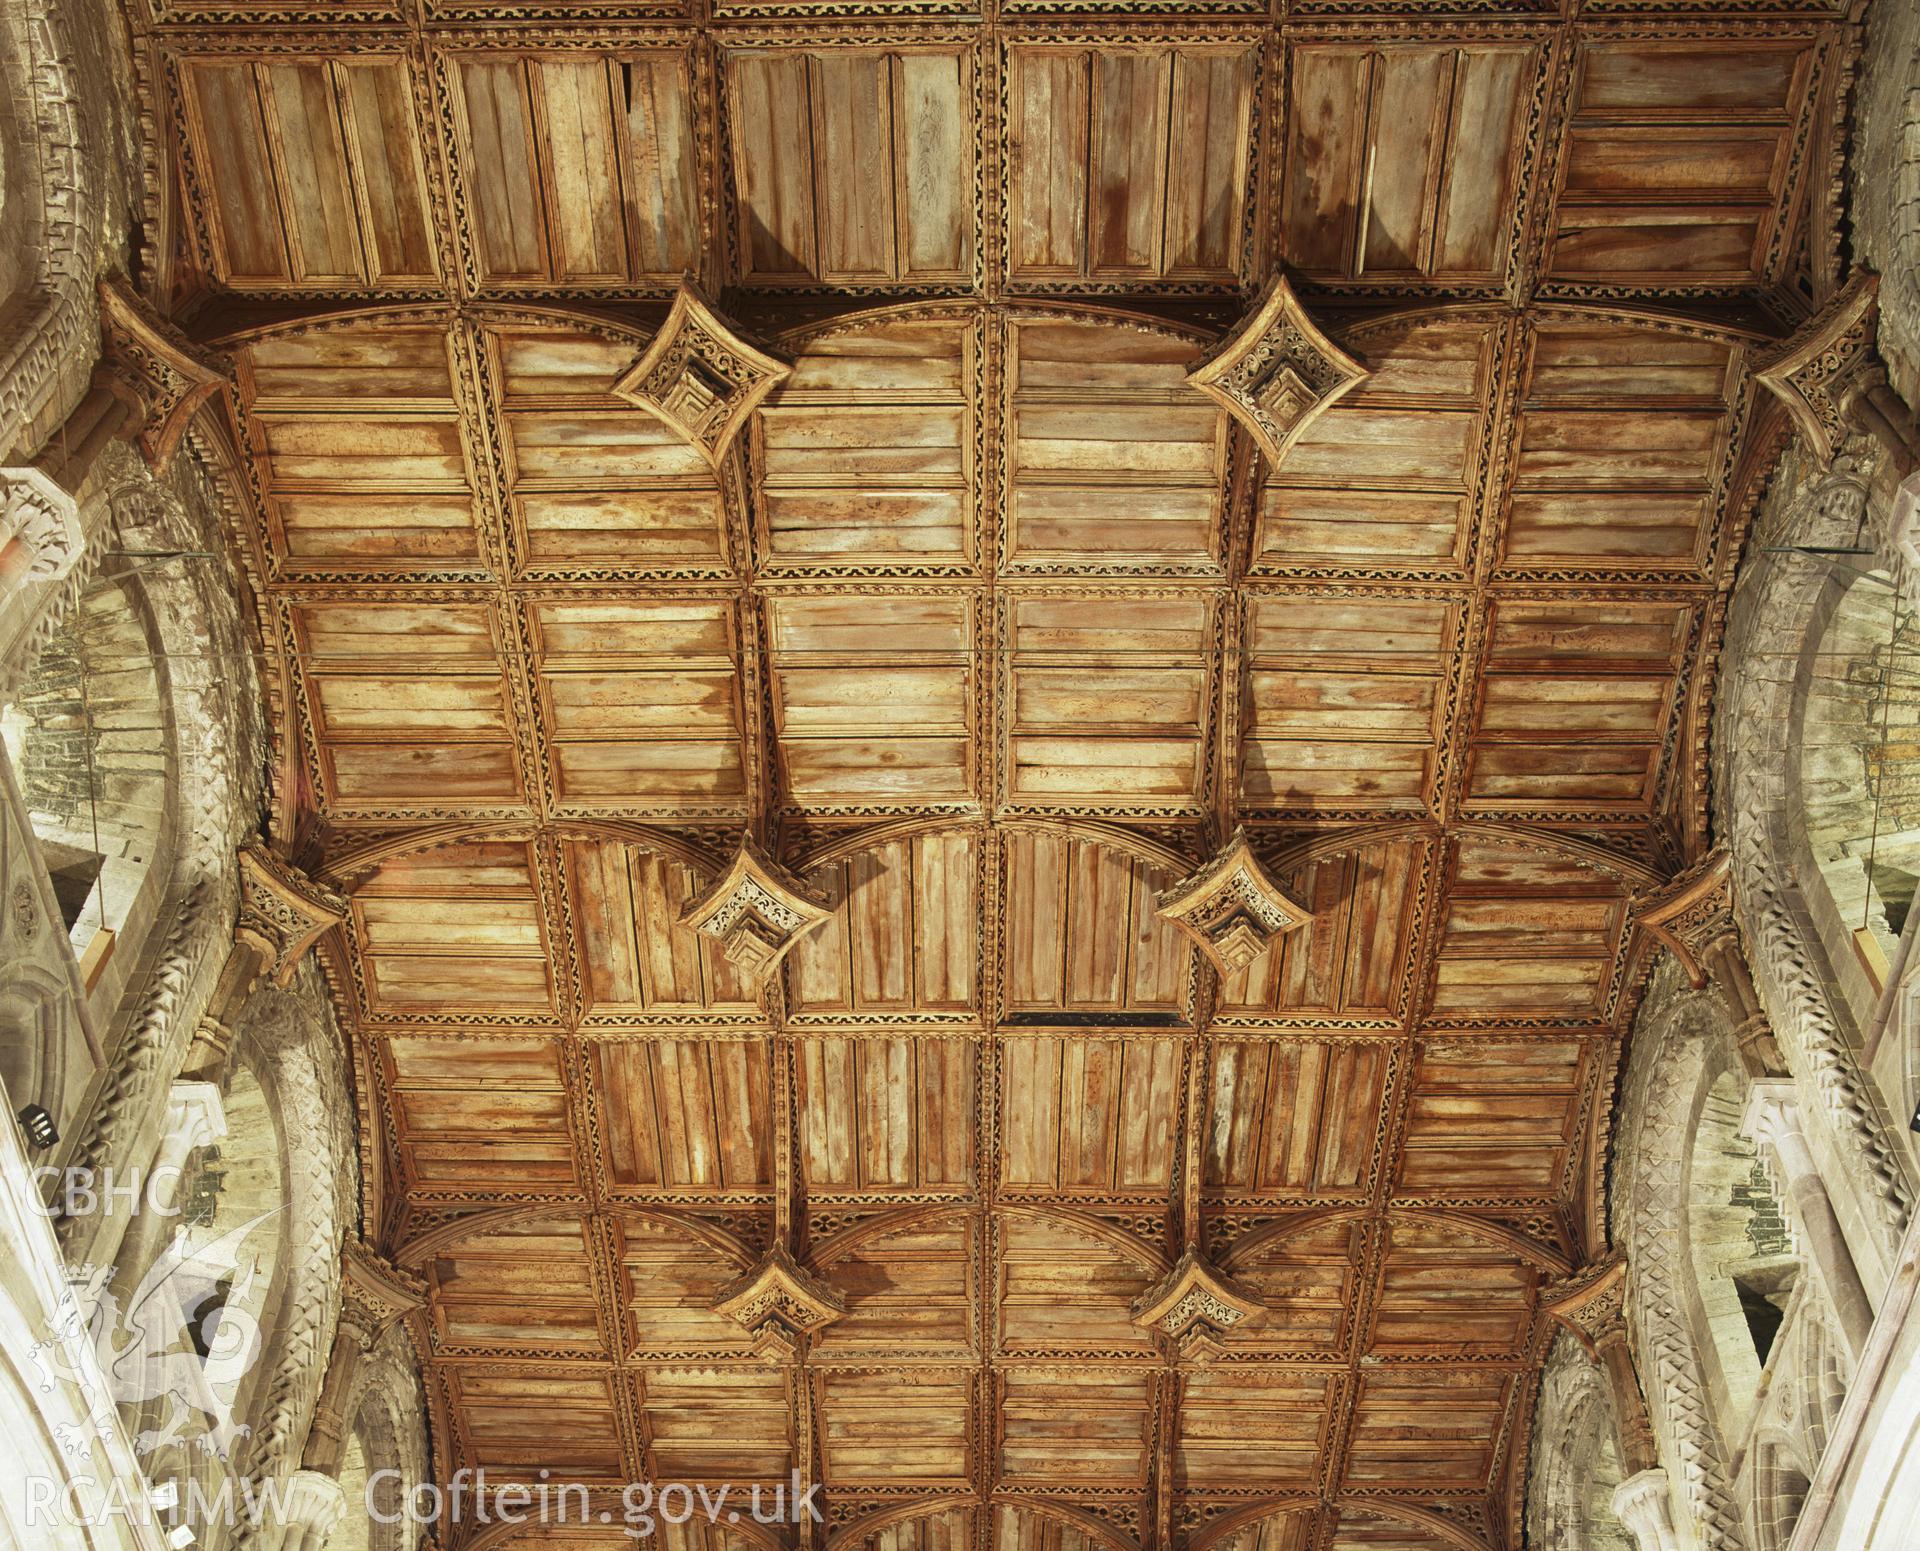 RCAHMW colour transparency showing view of the nave roof in St David's Cathedral taken by I.N. Wright, 2003.